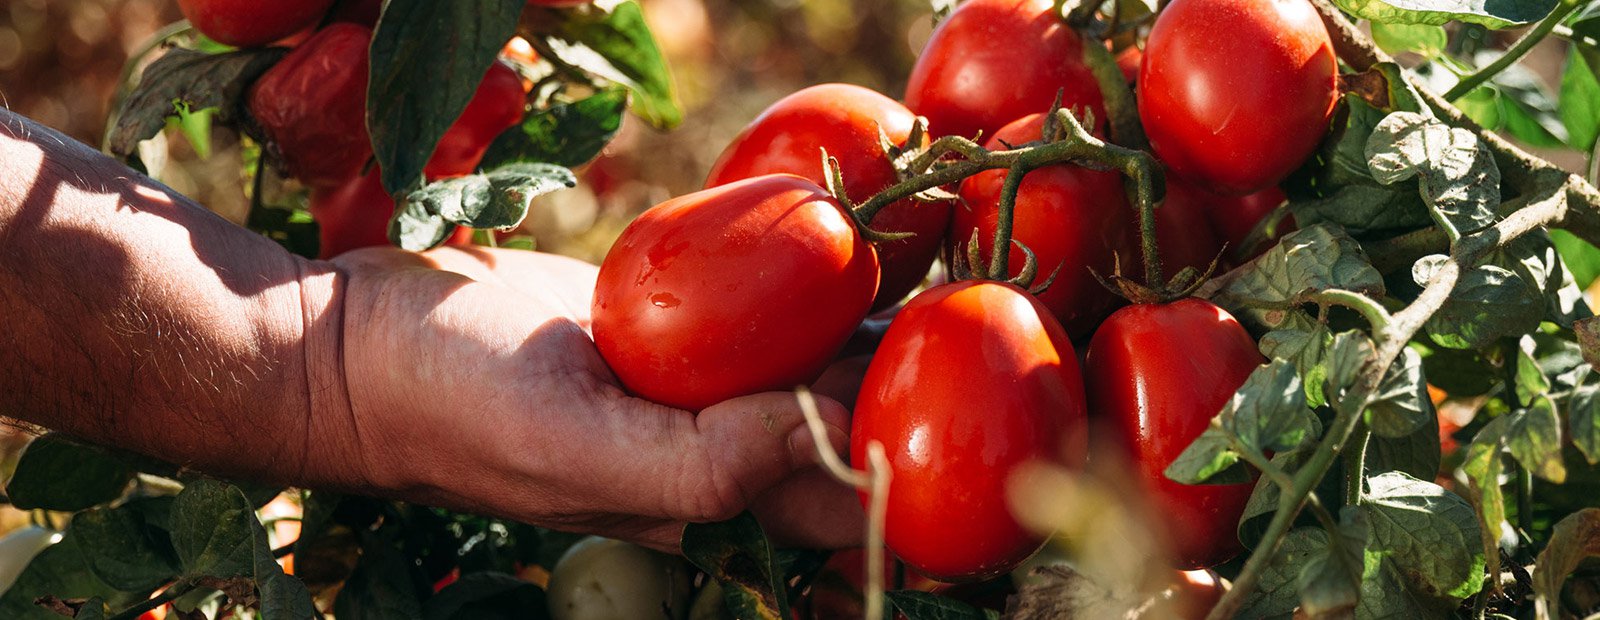 Tomatoes and health: staunch allies for your well-being!